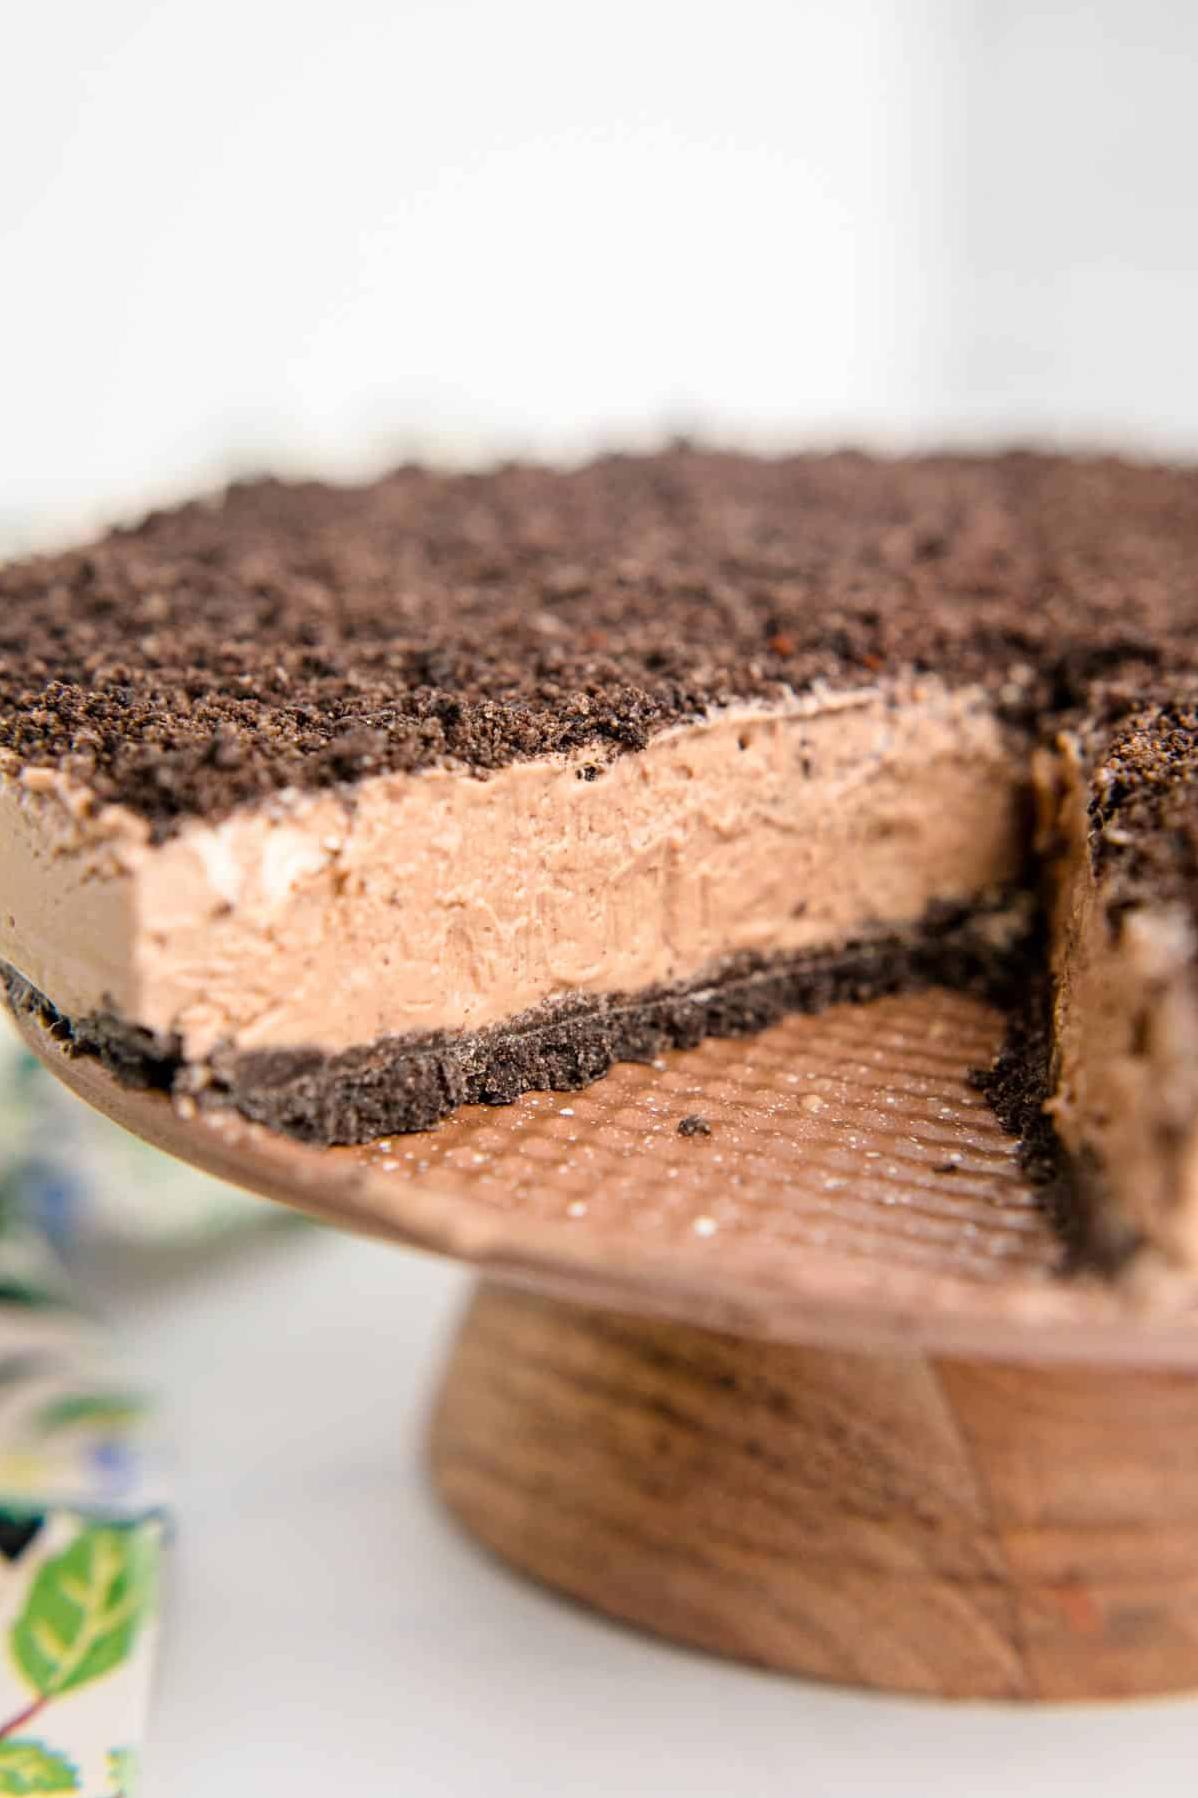  Crumbly, chocolatey, and the perfect base for any cheesecake 🤤